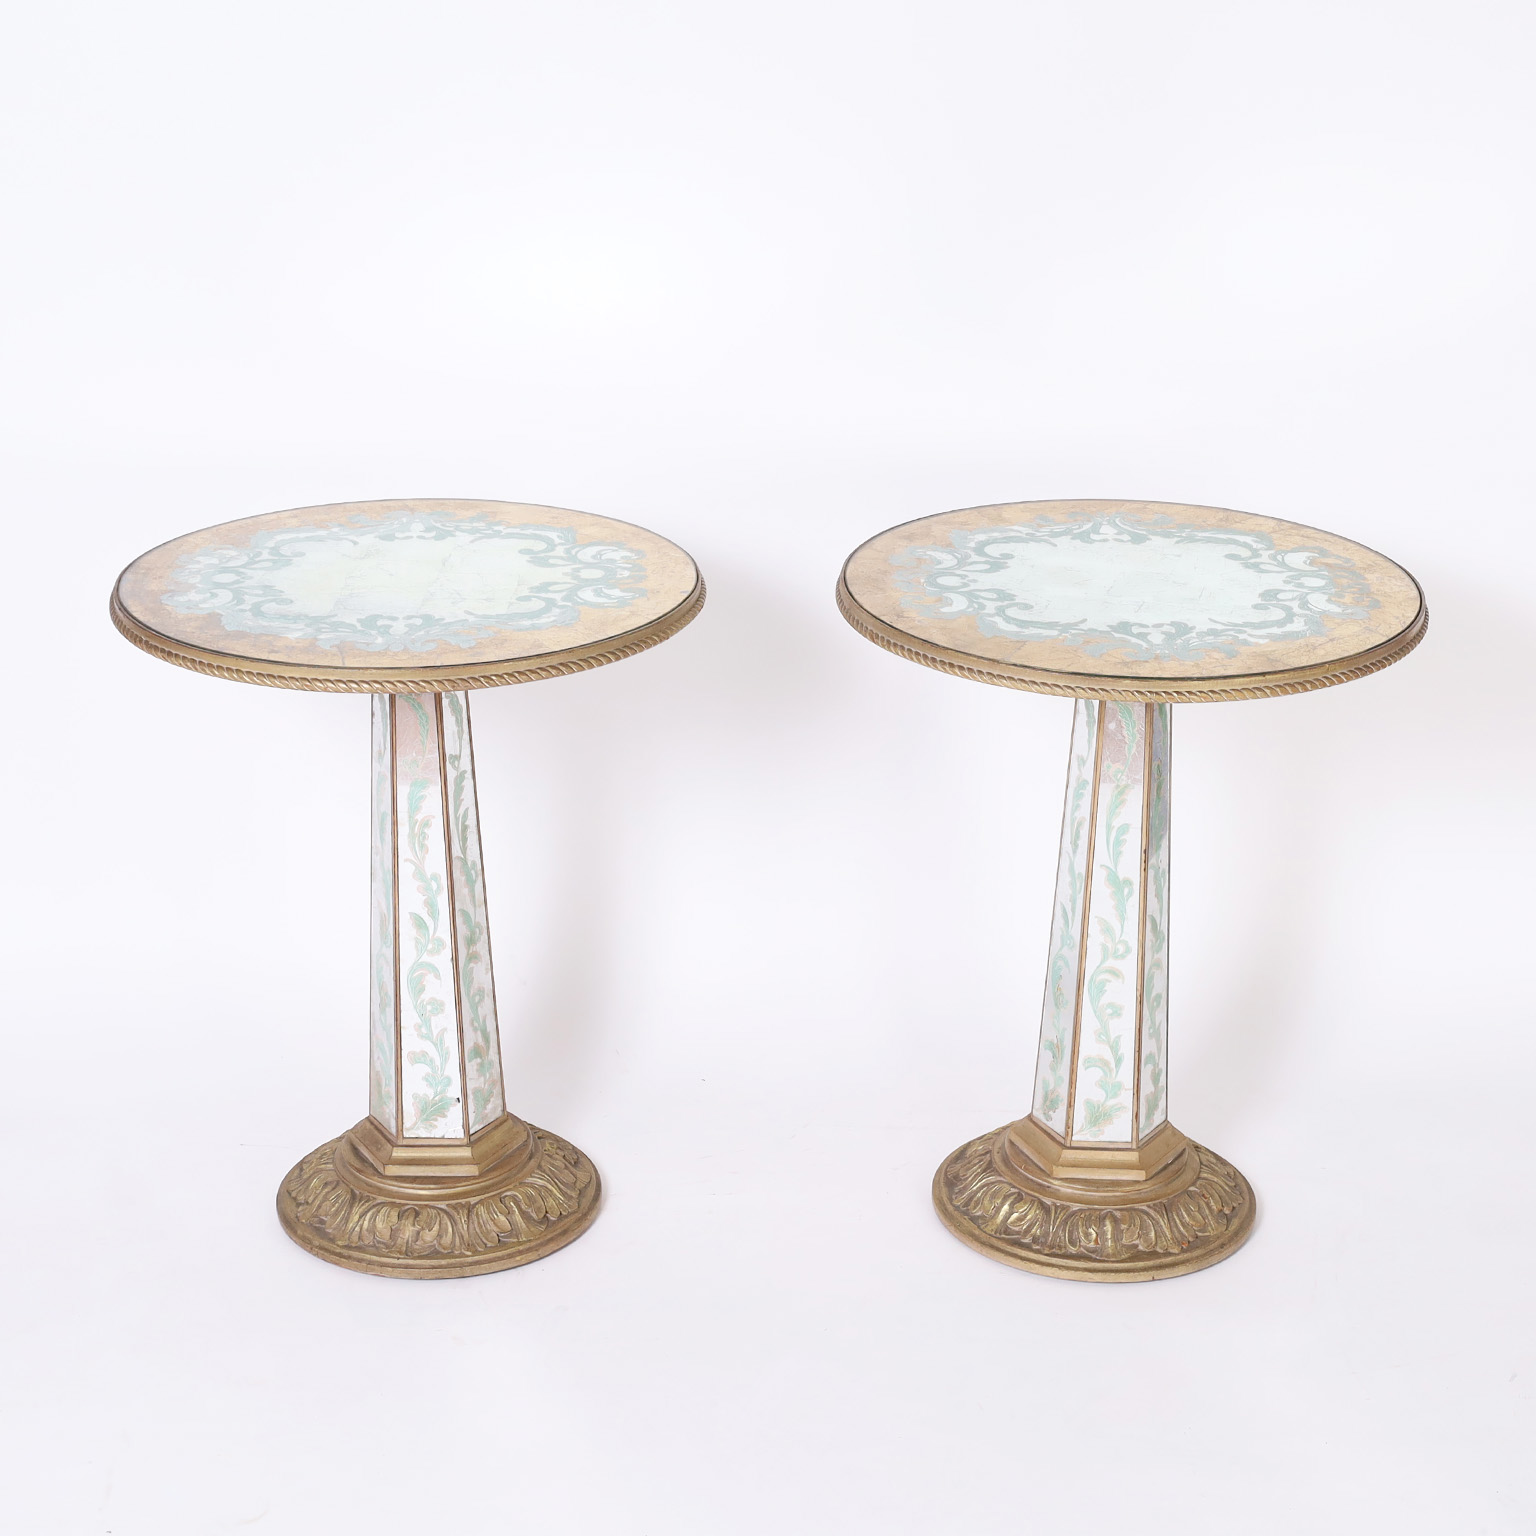 Pair of Italian Venetian Style Mirrored Round Pedestal Stands or Tables